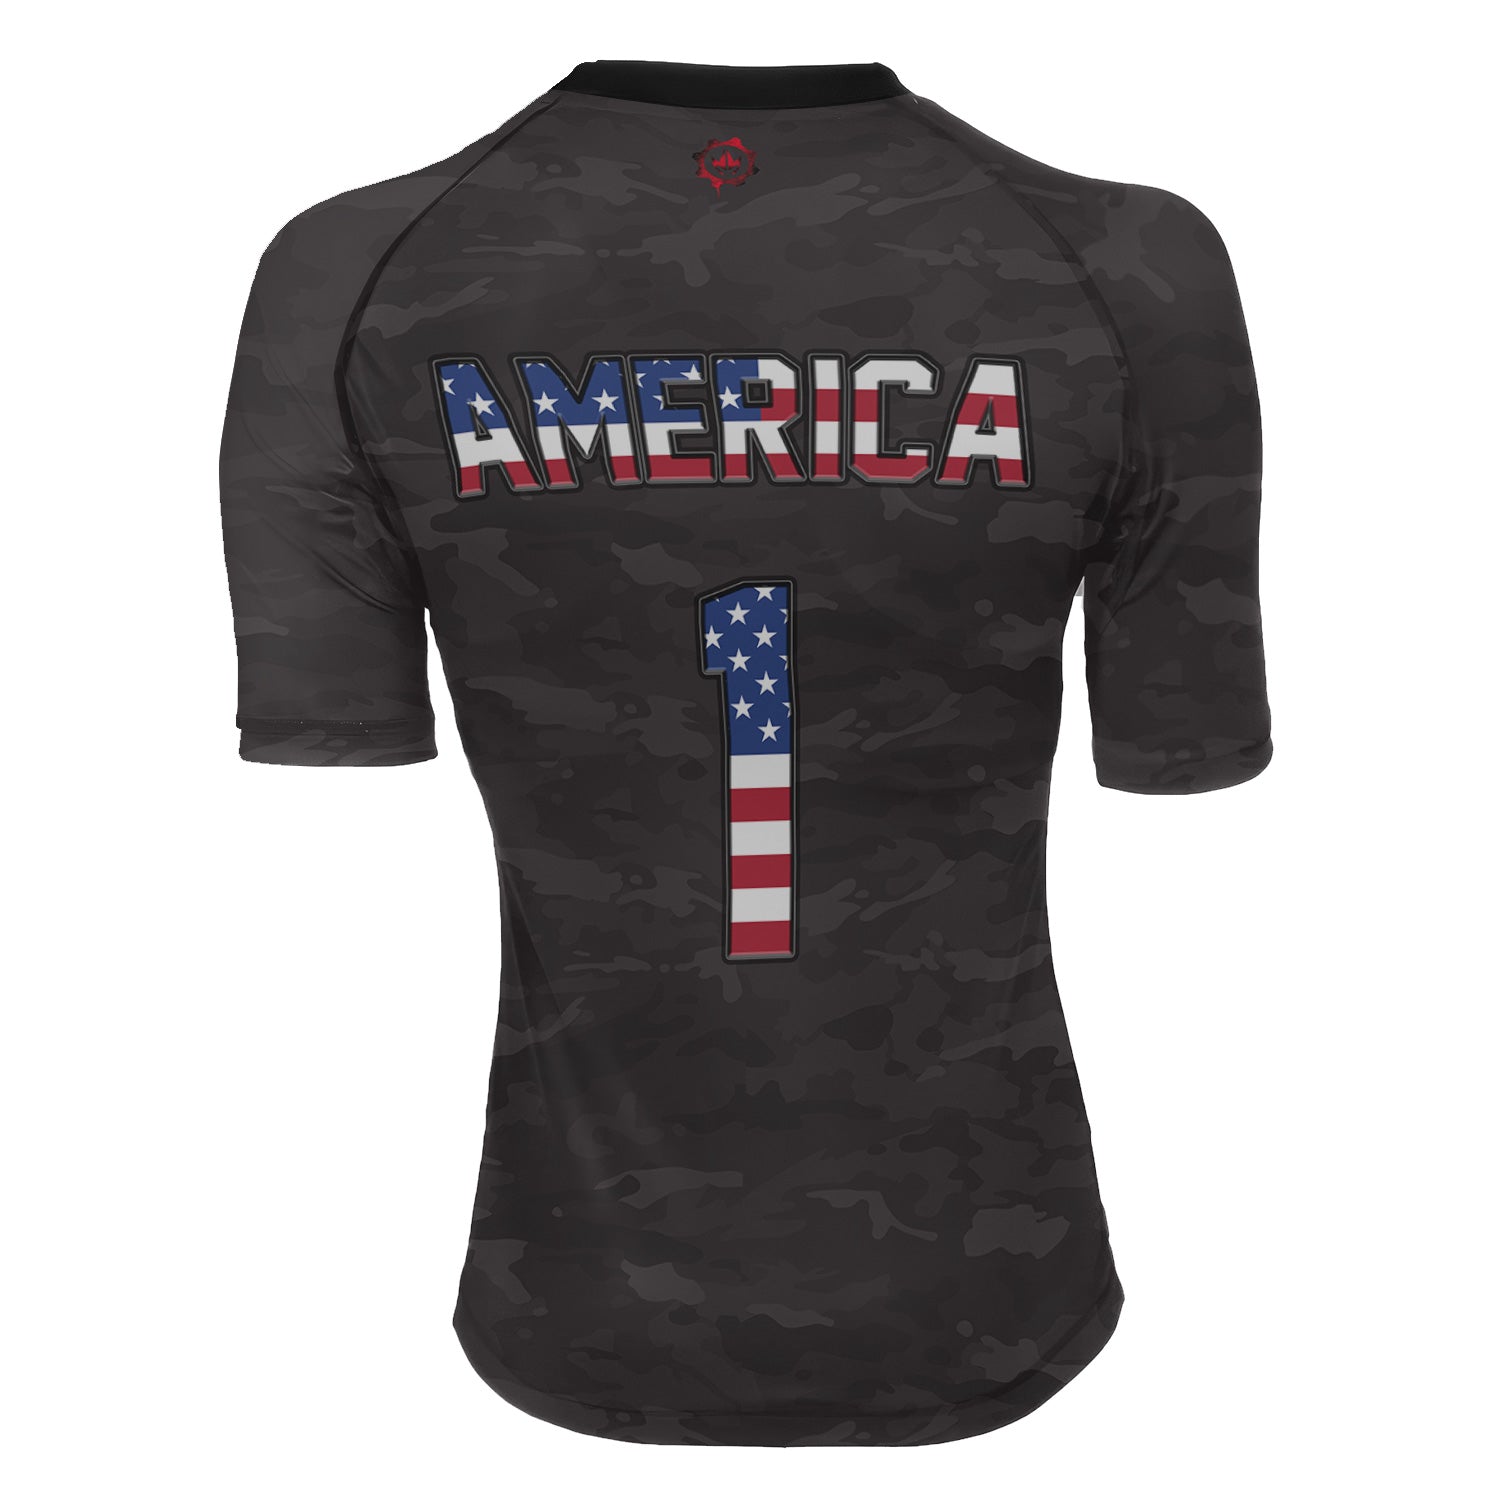 American Independence Day Women's Short Sleeve Rash Guard